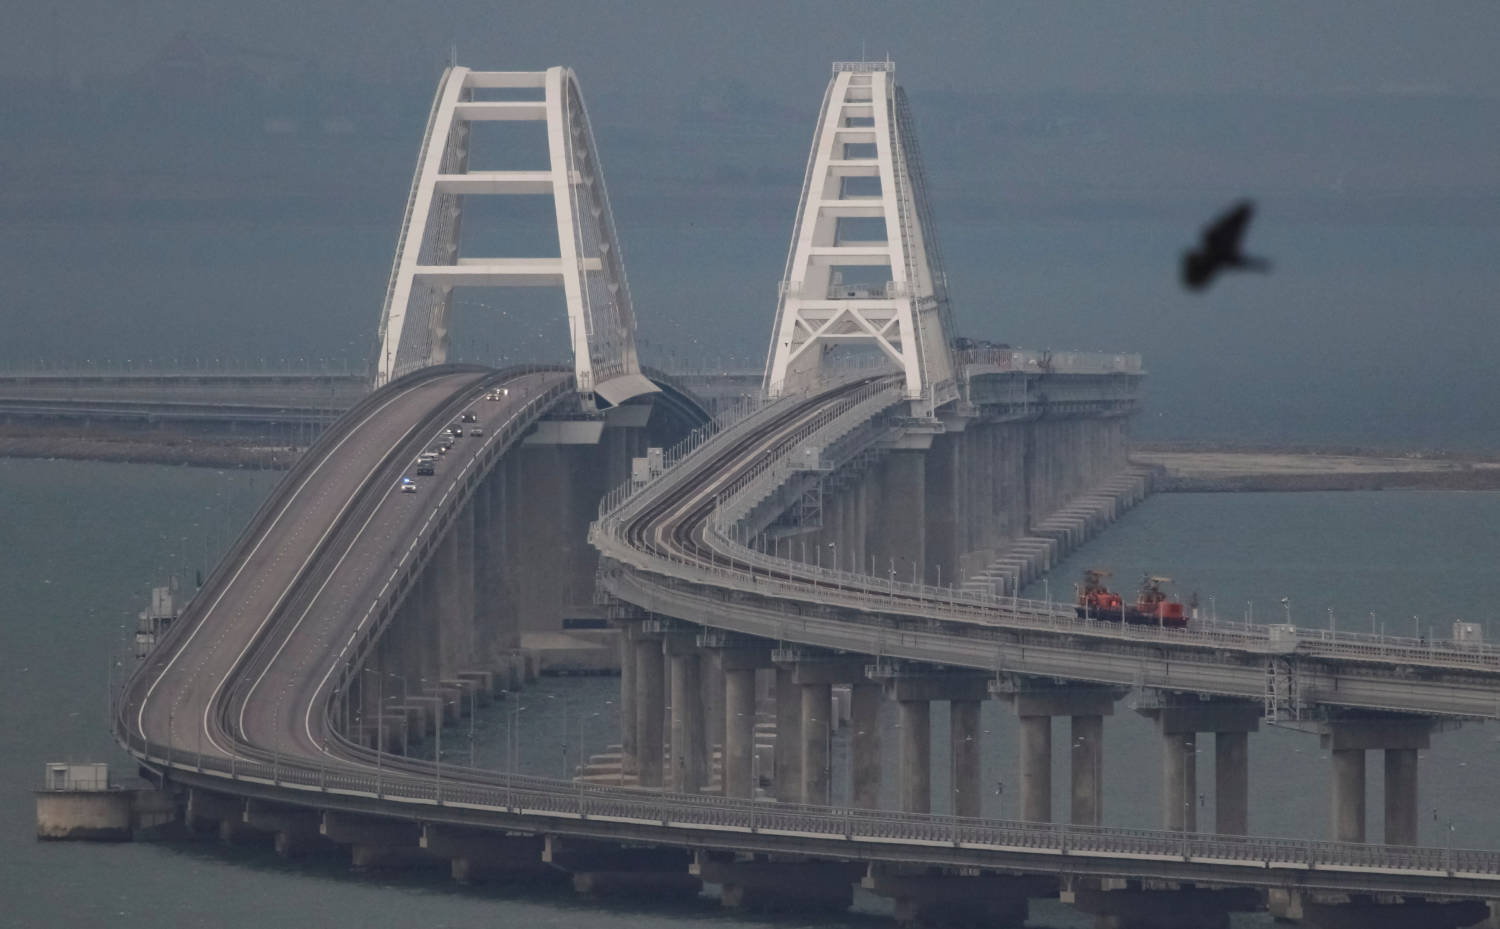 Passenger Cars Drive On The Kerch Bridge, After An Explosion Destroyed Part Of It, In The Kerch Strait, Crimea